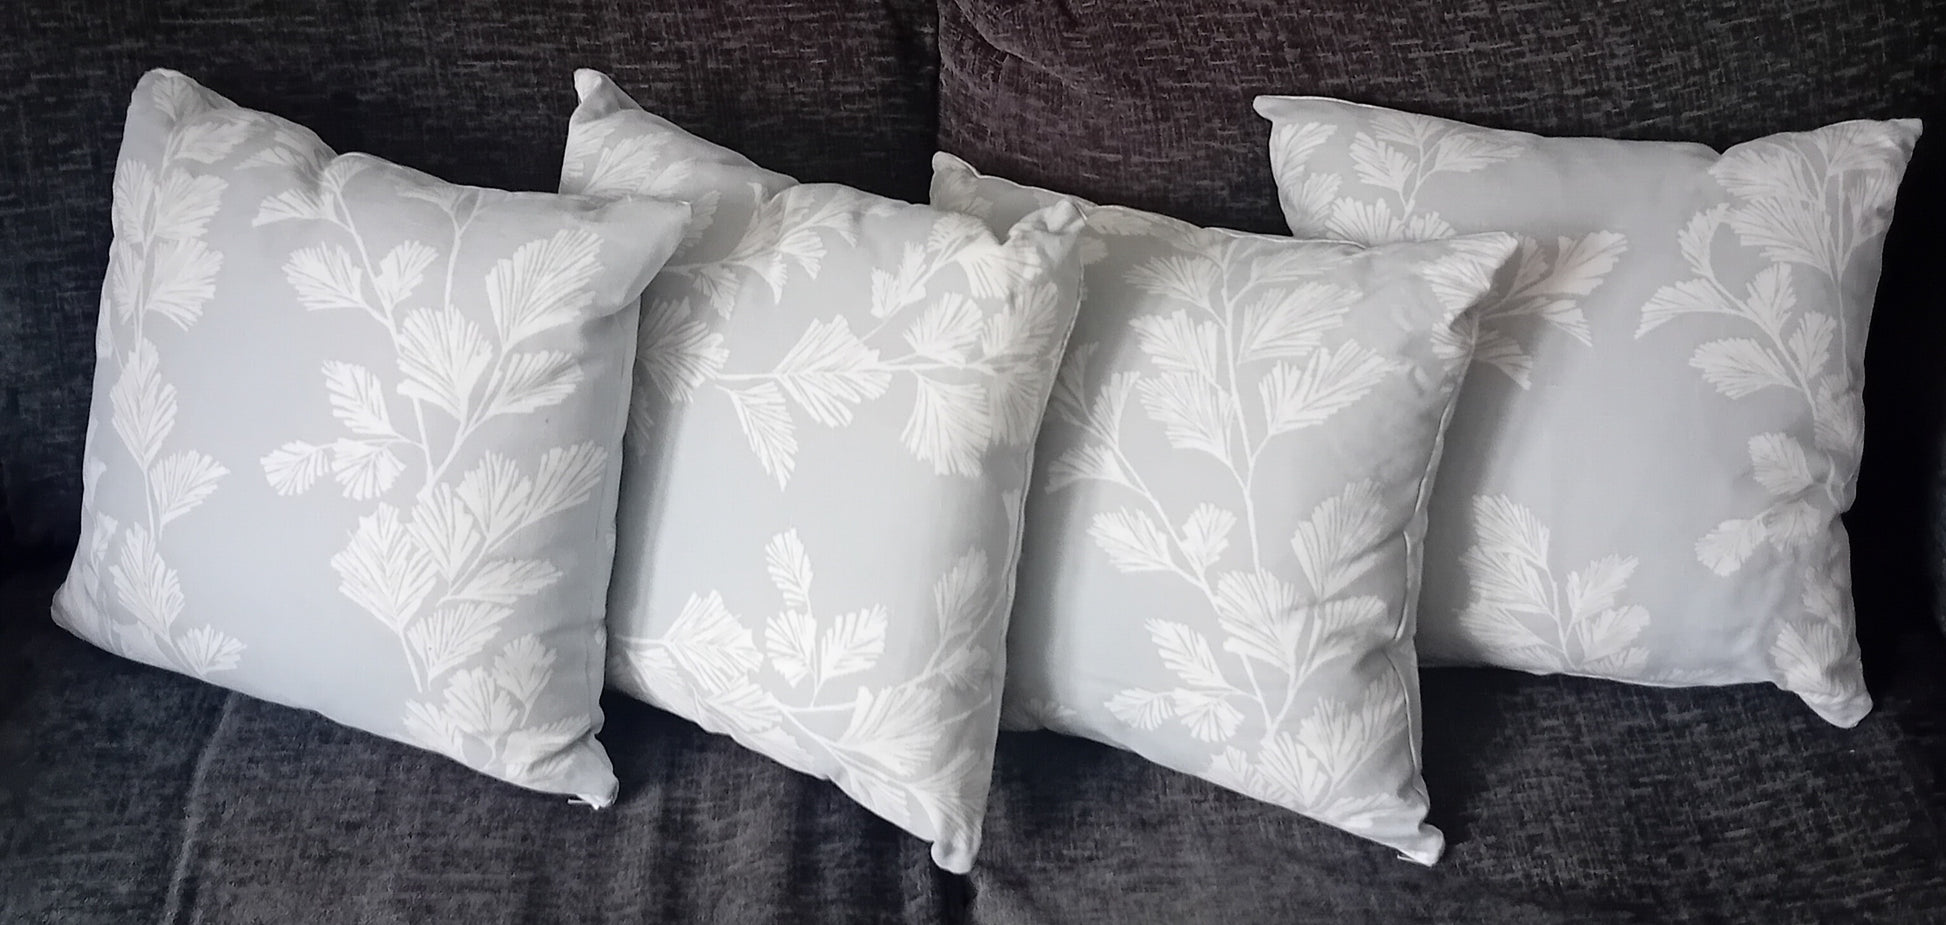 4 x 43cm Tex023 Square Fibre Filled Scatter Cushions.